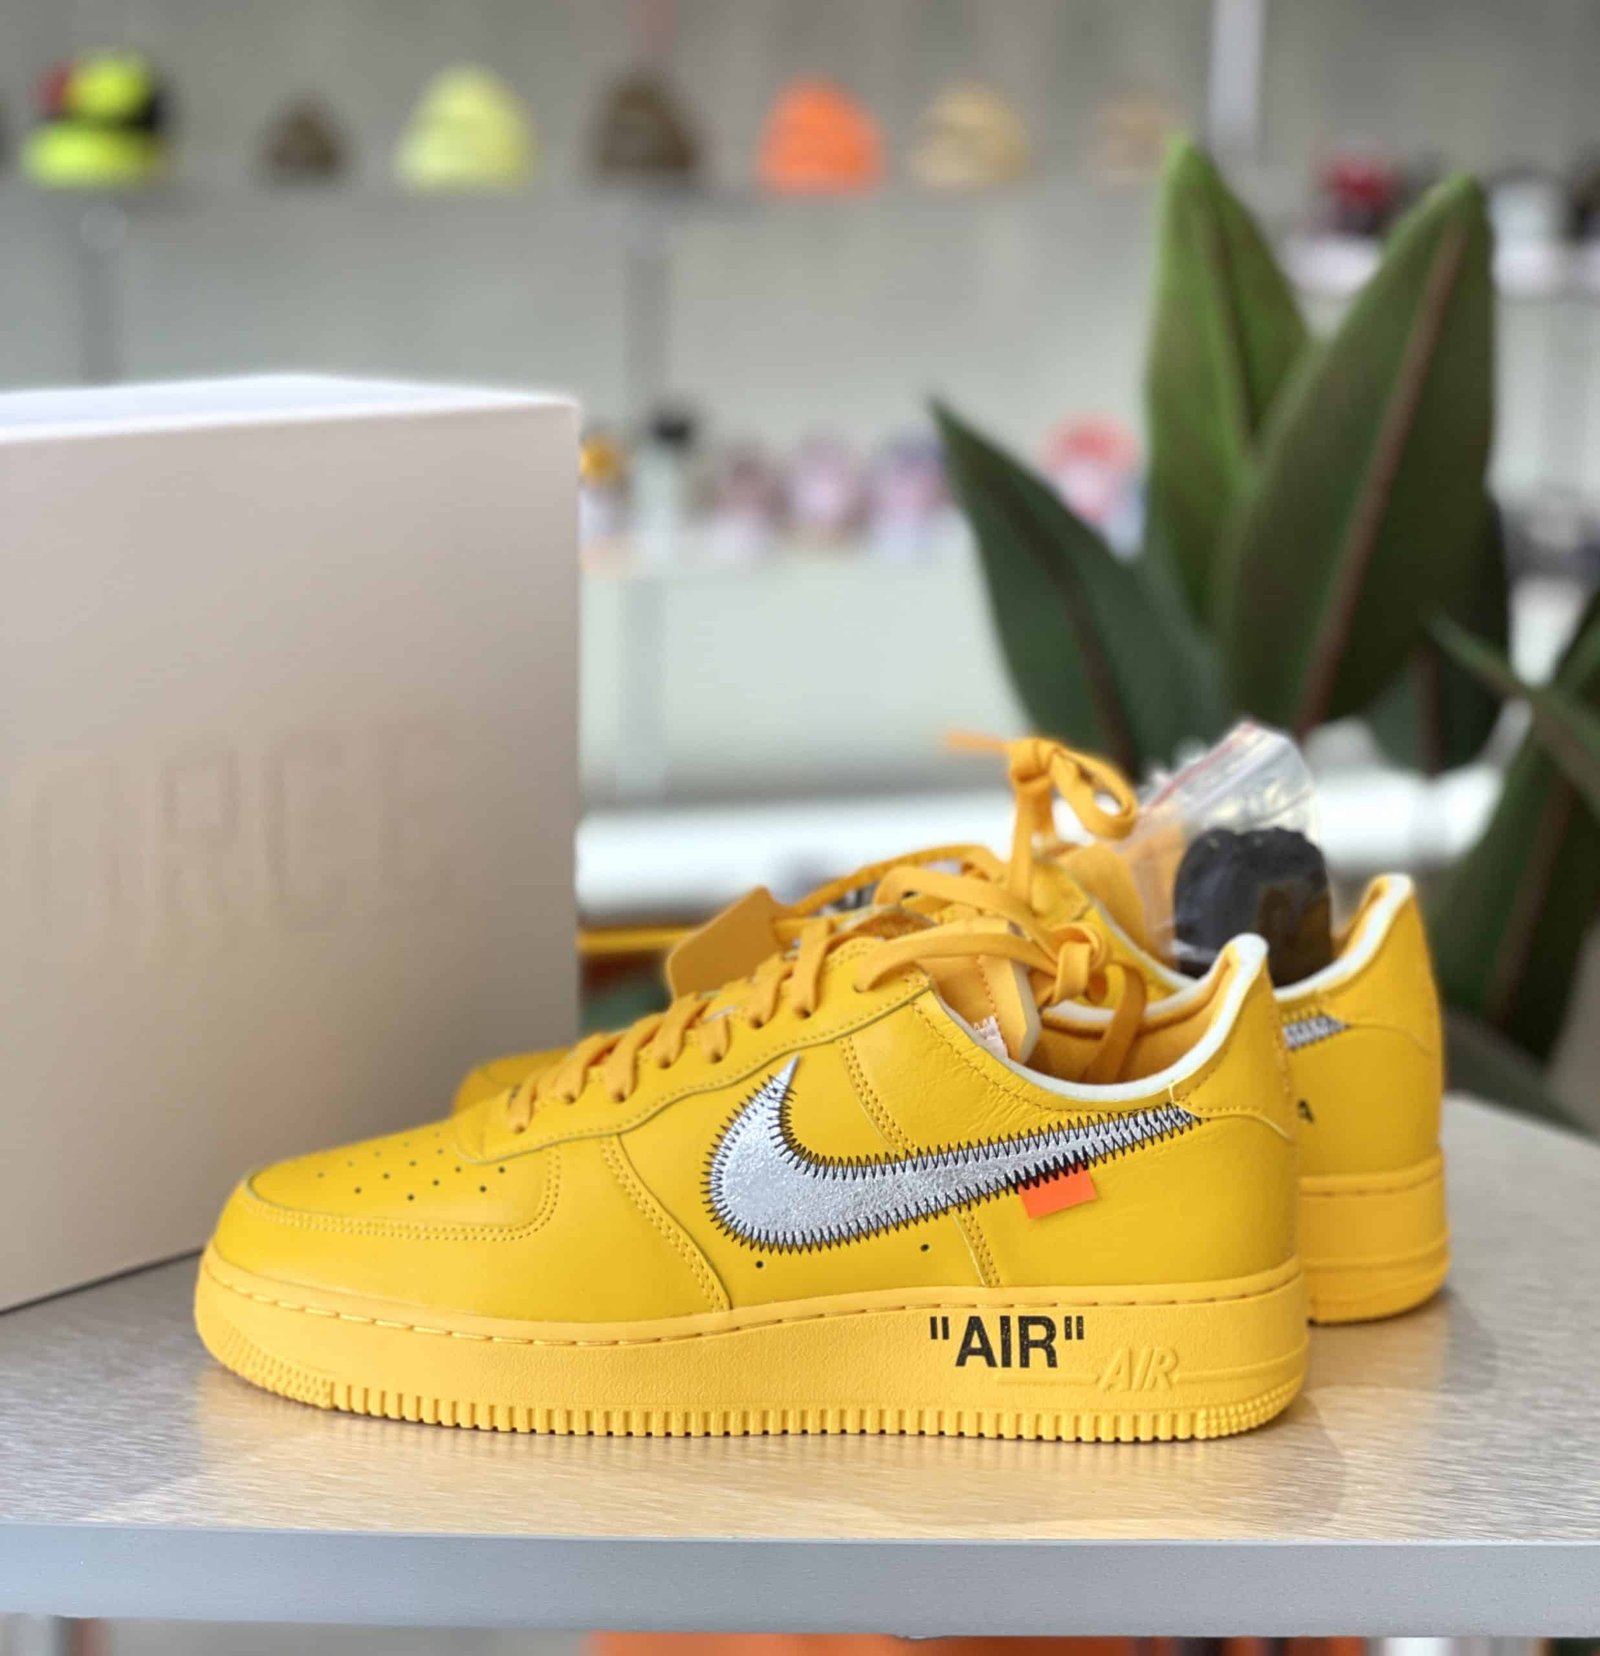 Nike Air Force 1 Low Off-White ICA University Gold UK 7 Sneaker